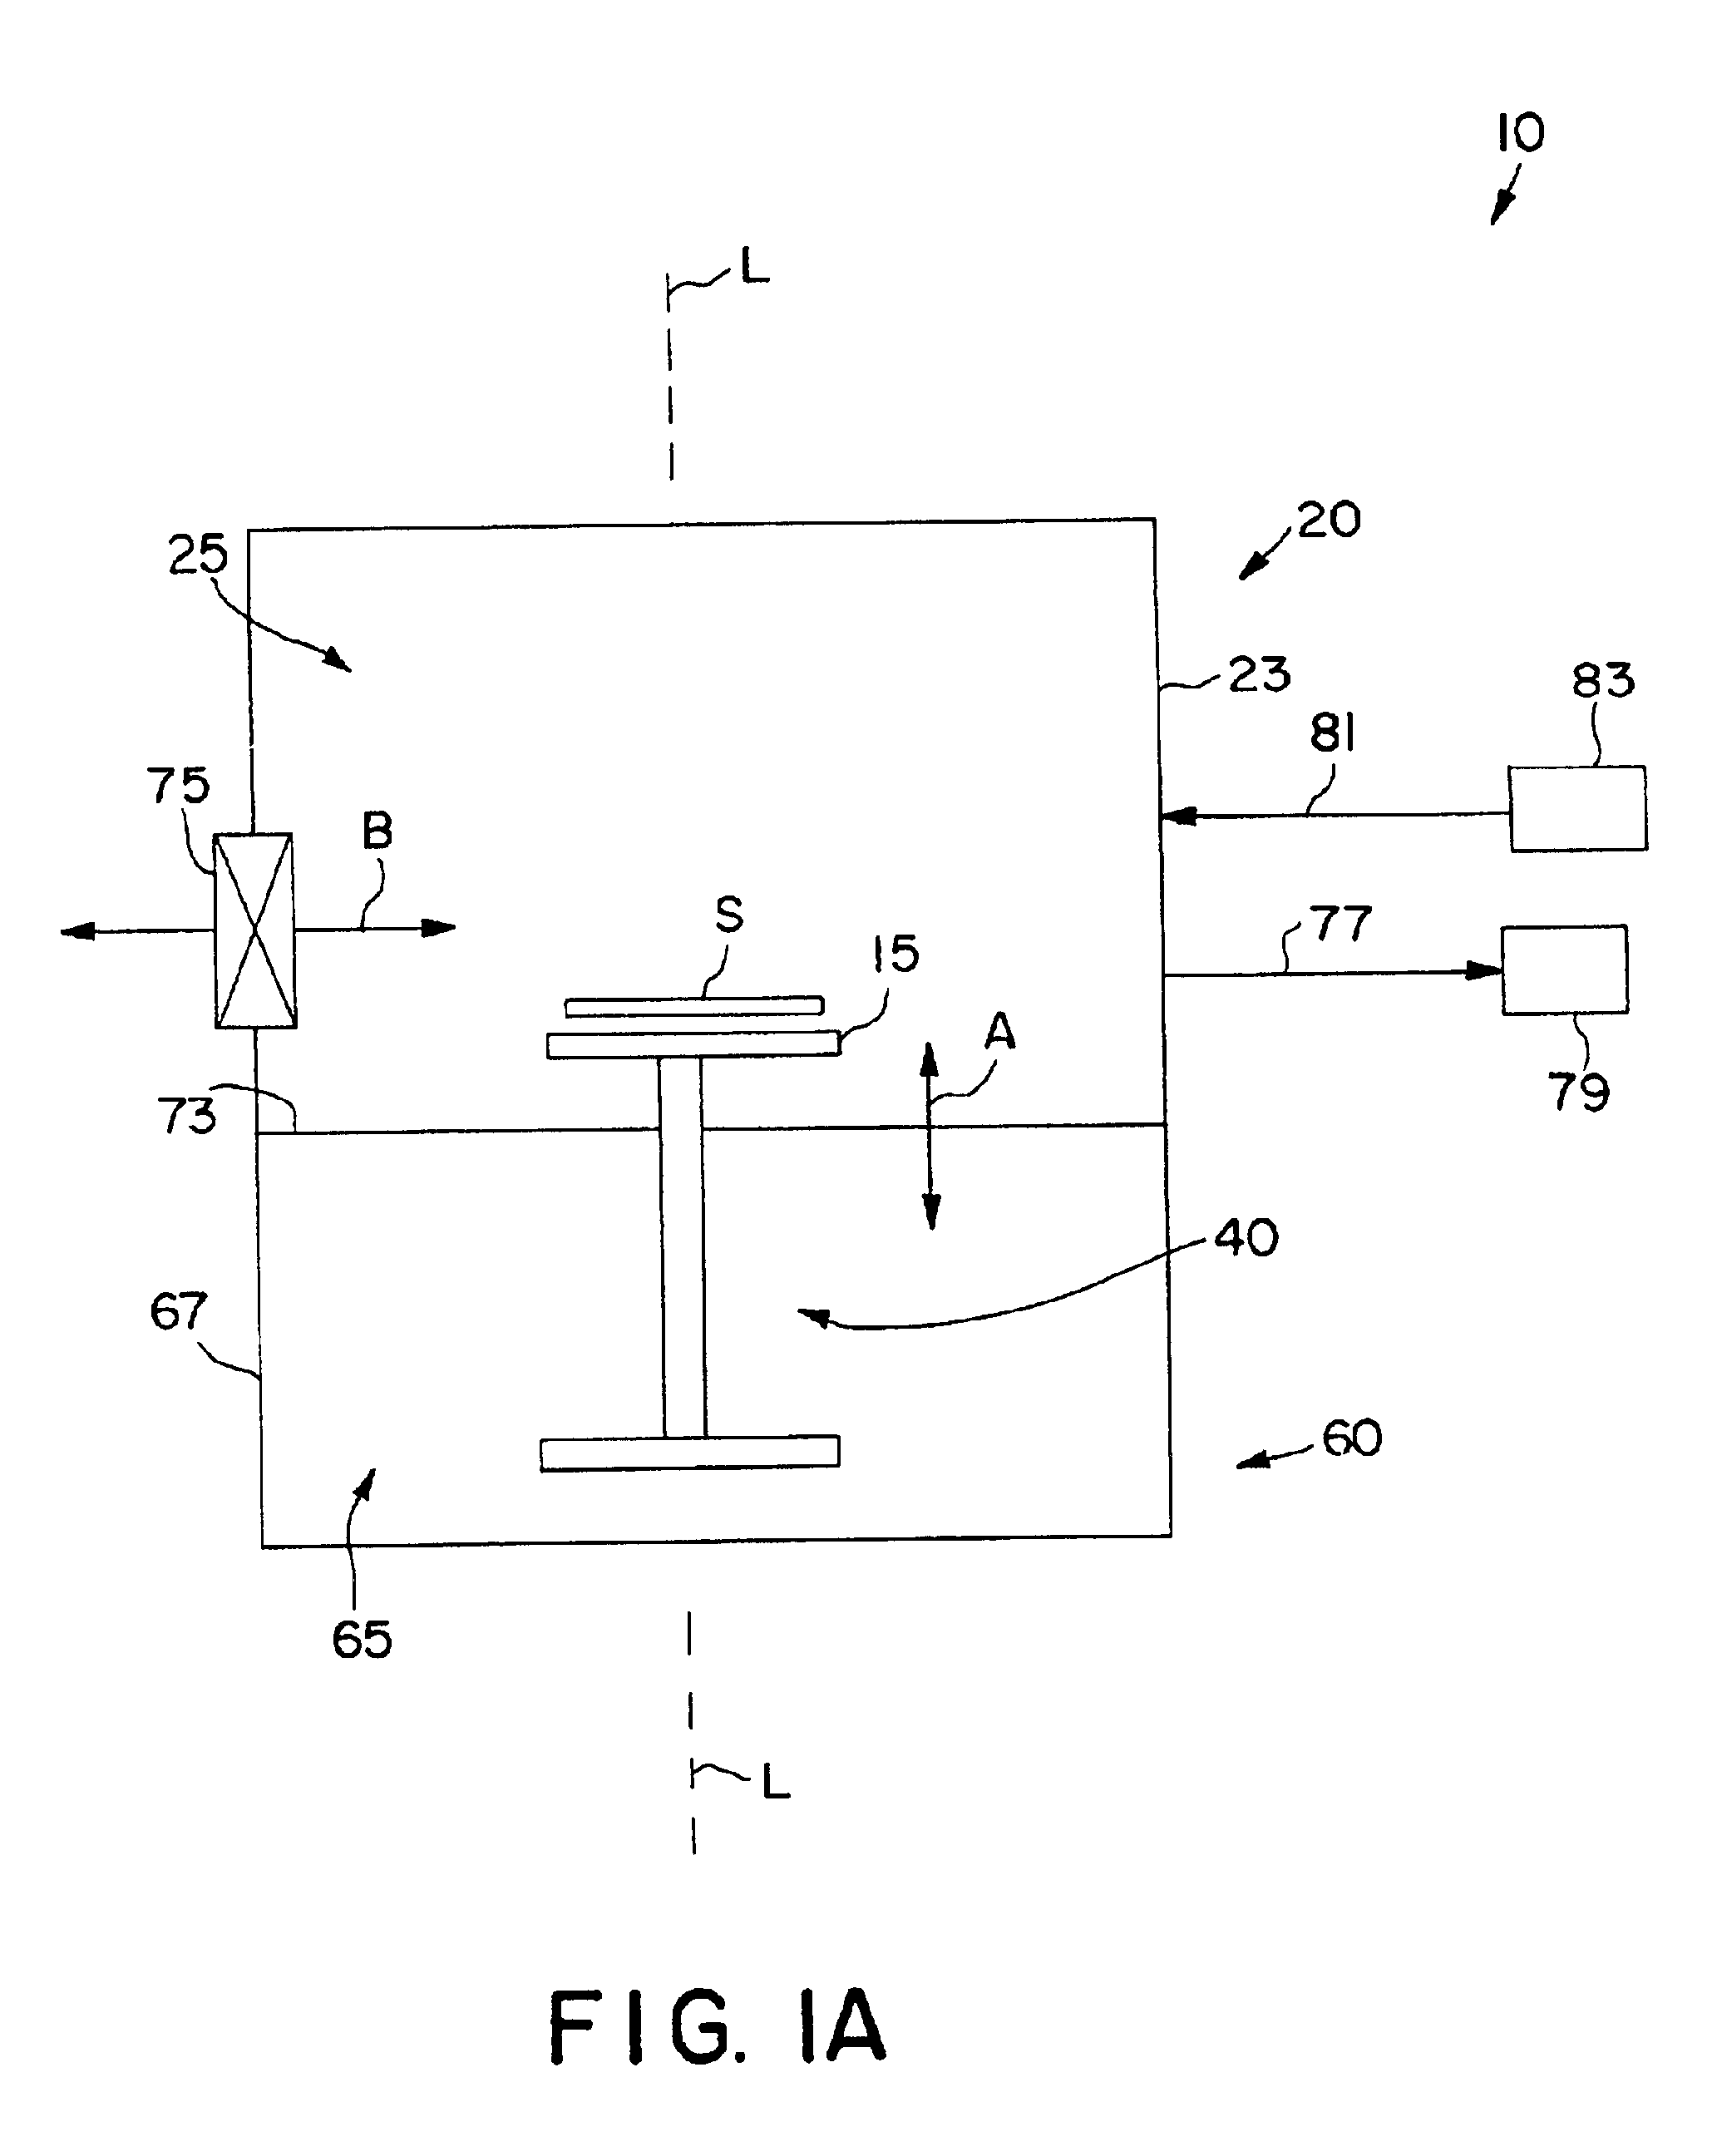 Substrate processing apparatus and related systems and methods